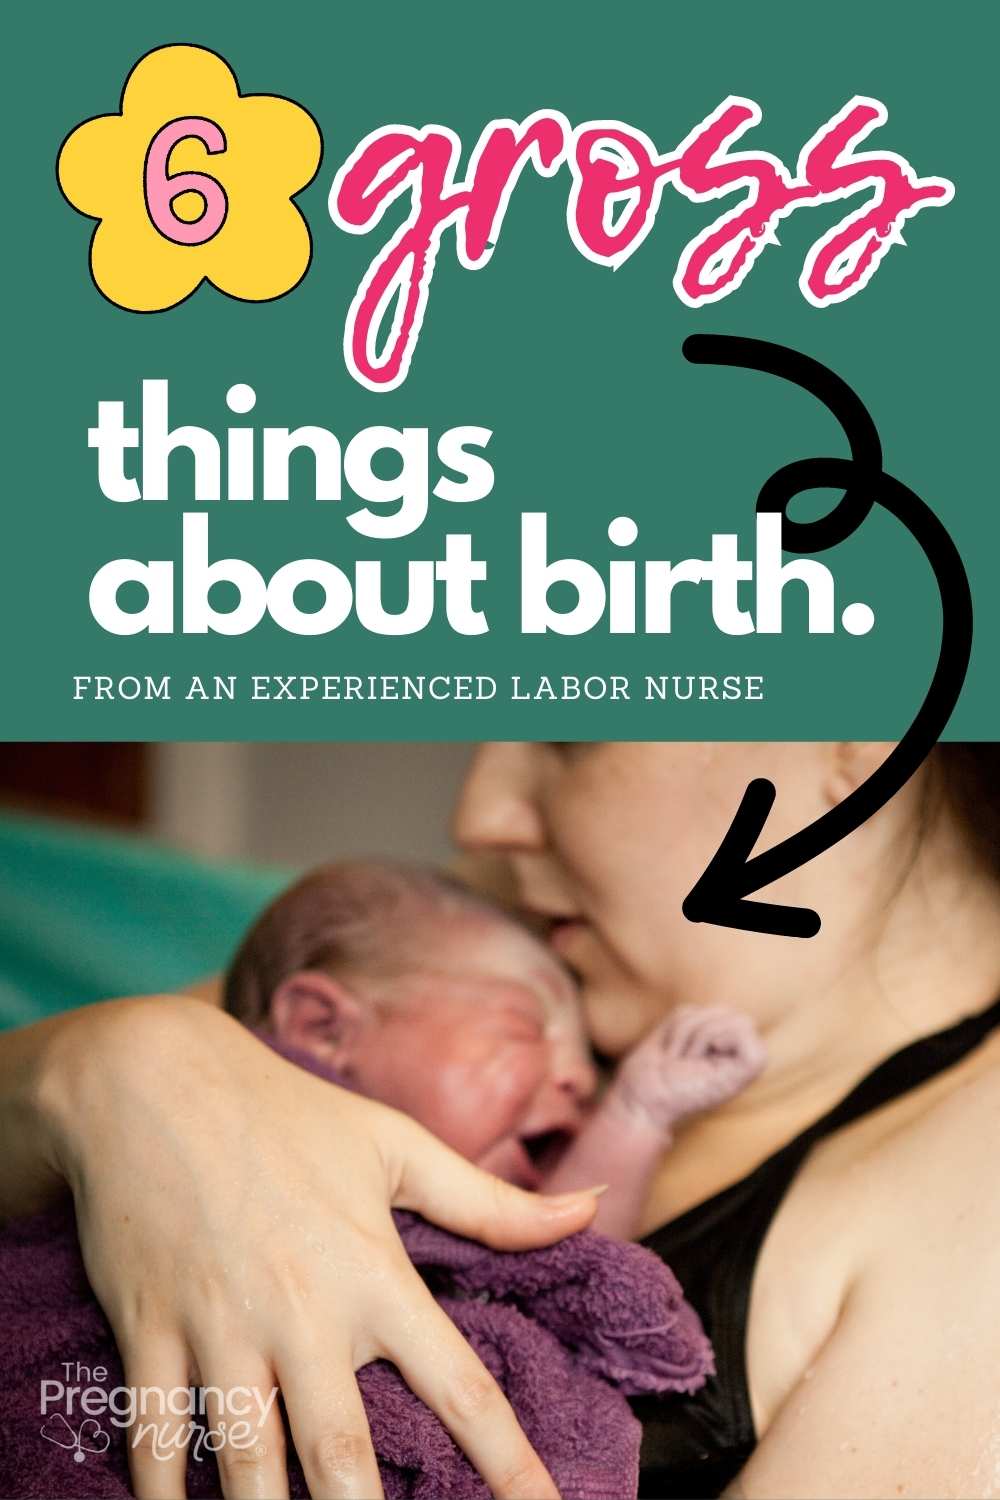 Dive into the untold realities of childbirth with our "Unveiling Motherhood: 6 Gross Yet Fascinating Aspects of Birth". Uncover the weird, messy and wonderfully natural aspects of birth that often get brushed under the carpet. This is a must-read for soon-to-be mothers, partners, and anyone curious about the miracle of childbirth. Brace yourself for an enlightening journey!